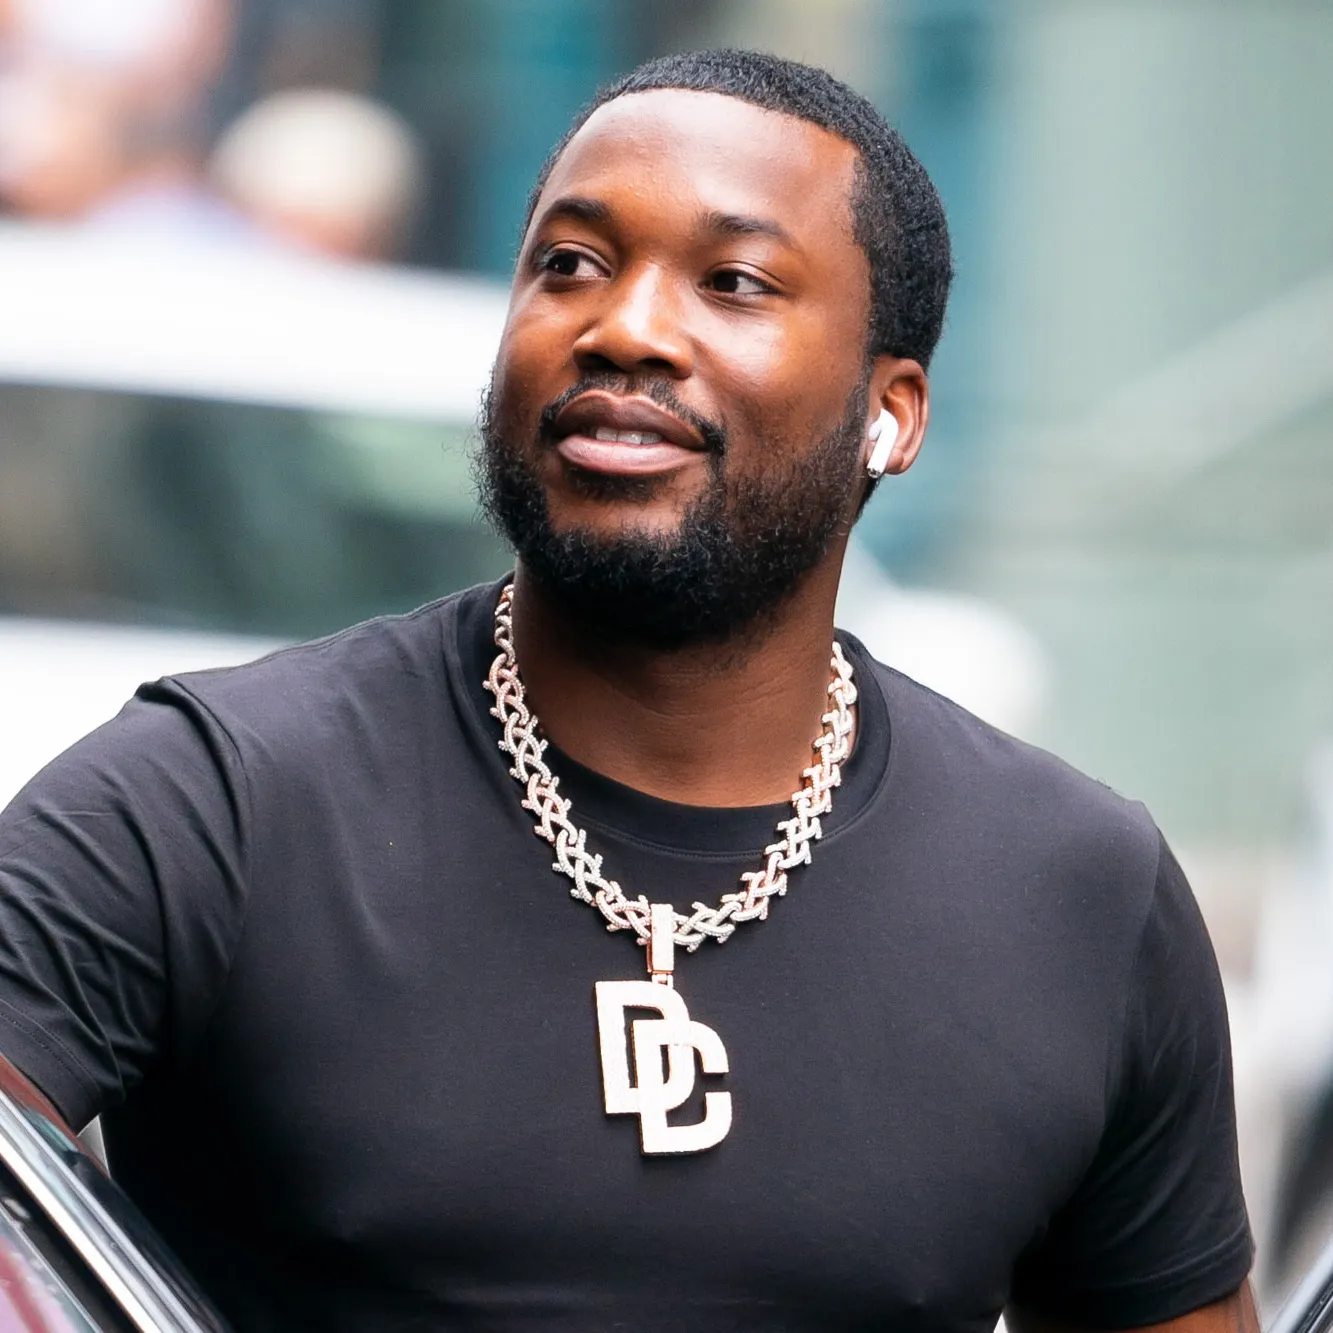 American rapper Meek Mill has joined the long list of celebrities who have  paid tribute to mohbad. - CityFM 105.1